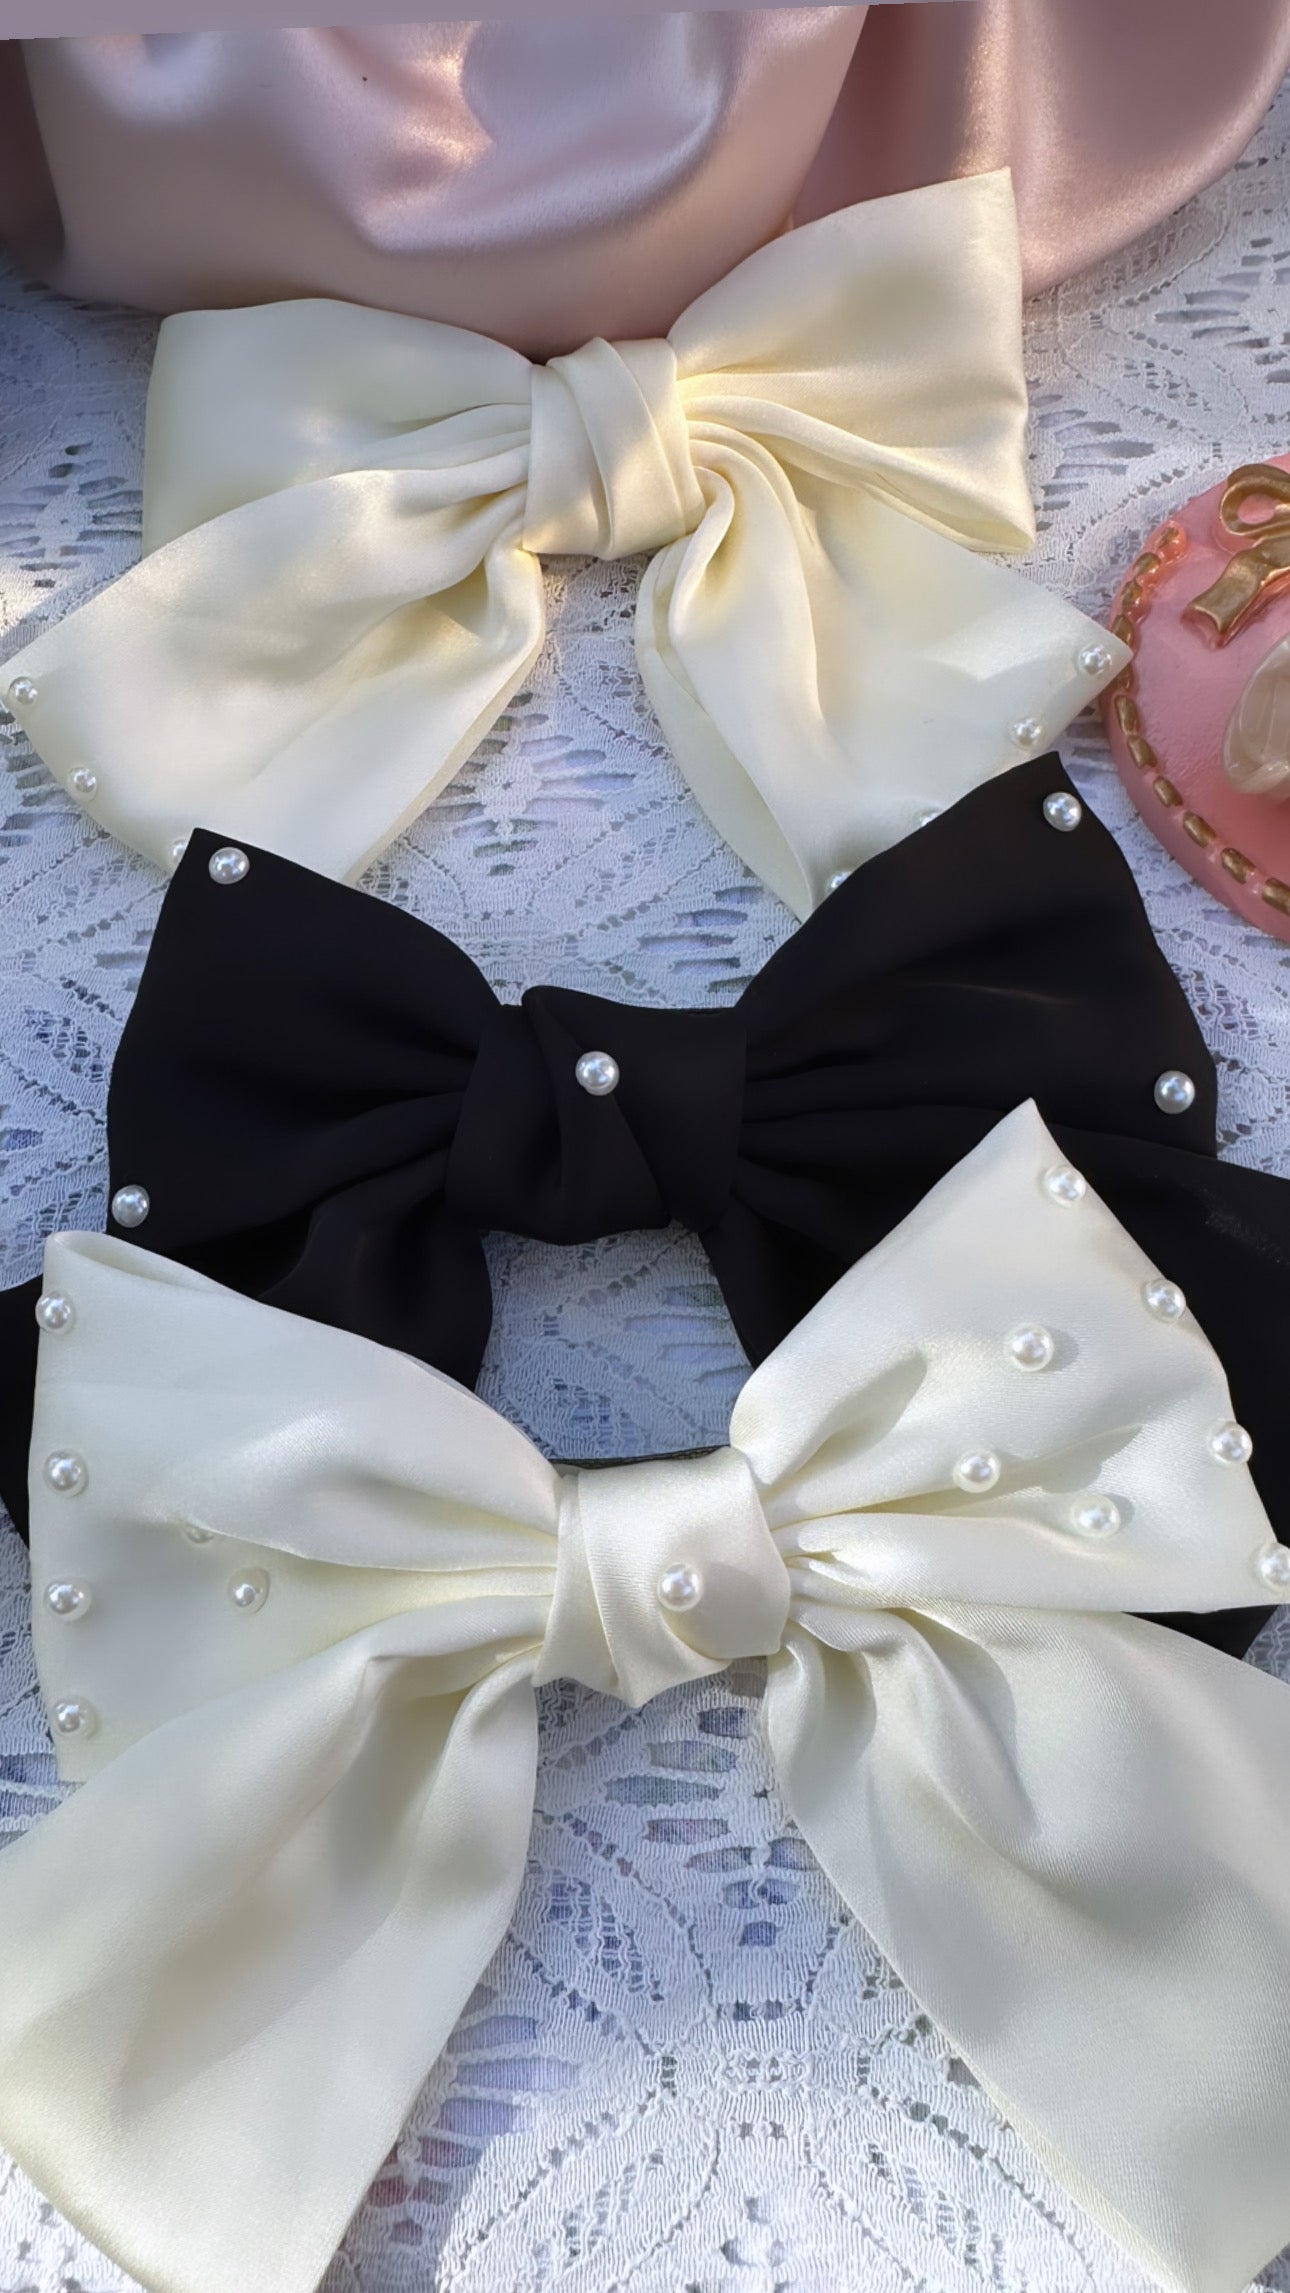 NLA HAIR CLIP - BOW WITH PEARLS – NLAcollection